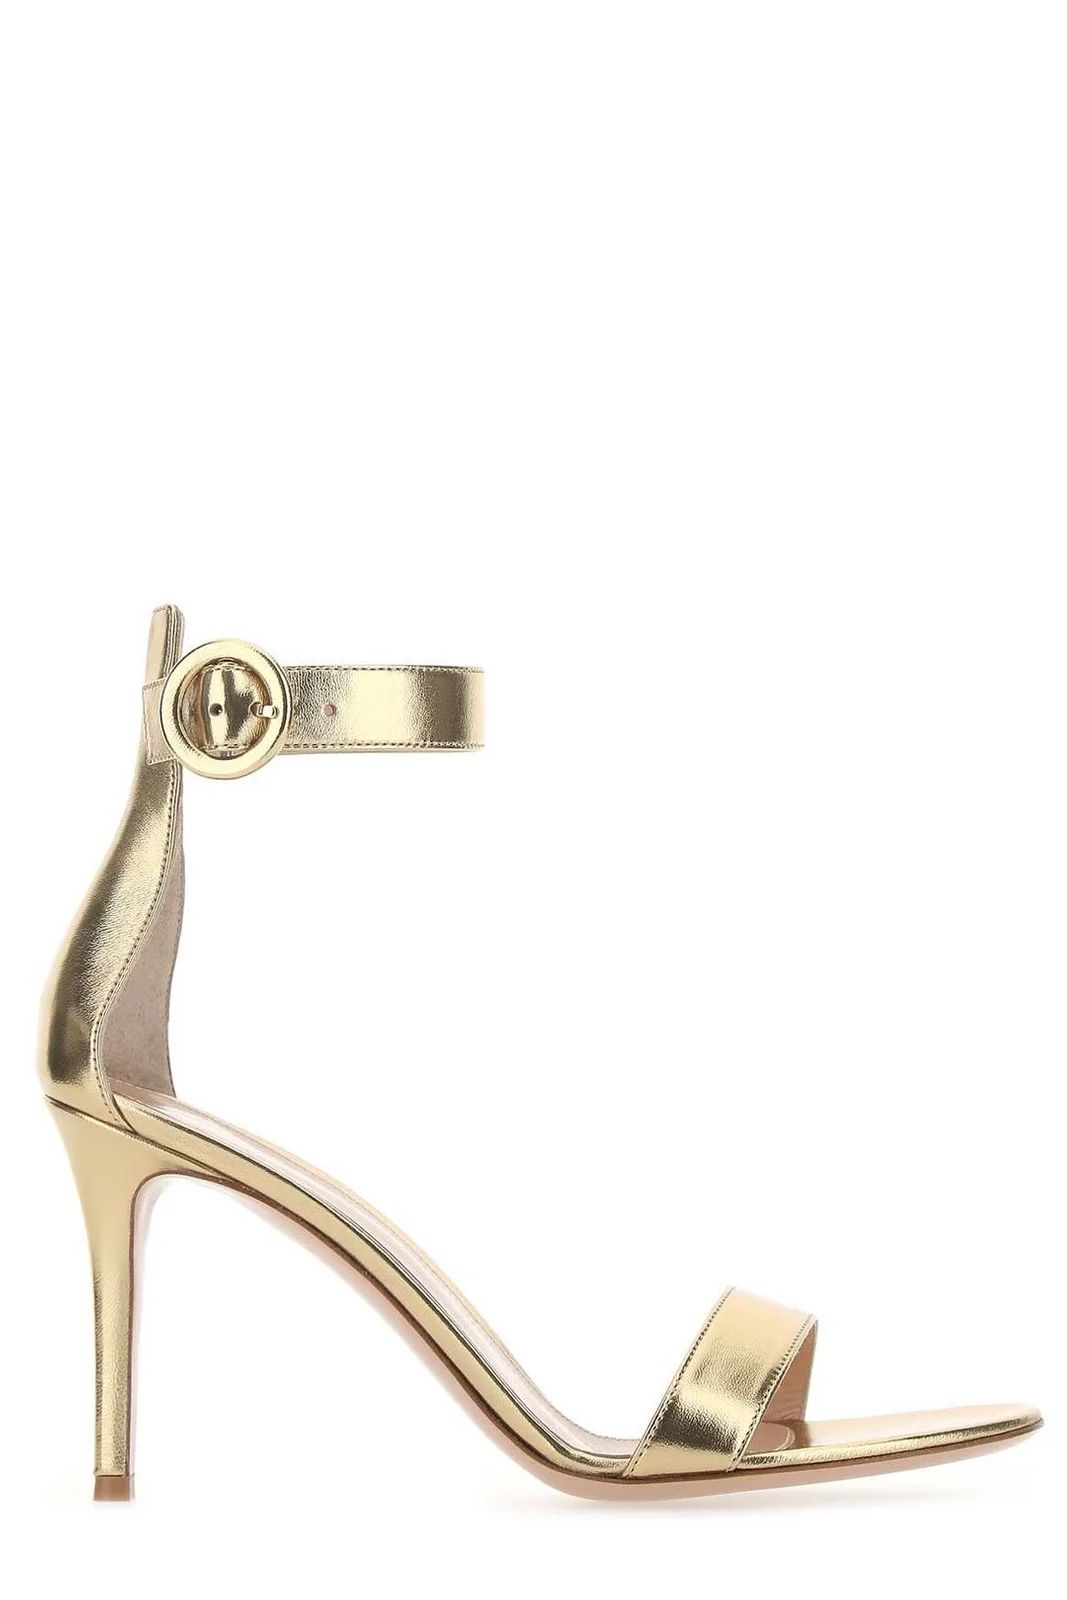 Gianvito Rossi Metallic-Effect Ankle Strap Heeled Sandals | Cettire Global